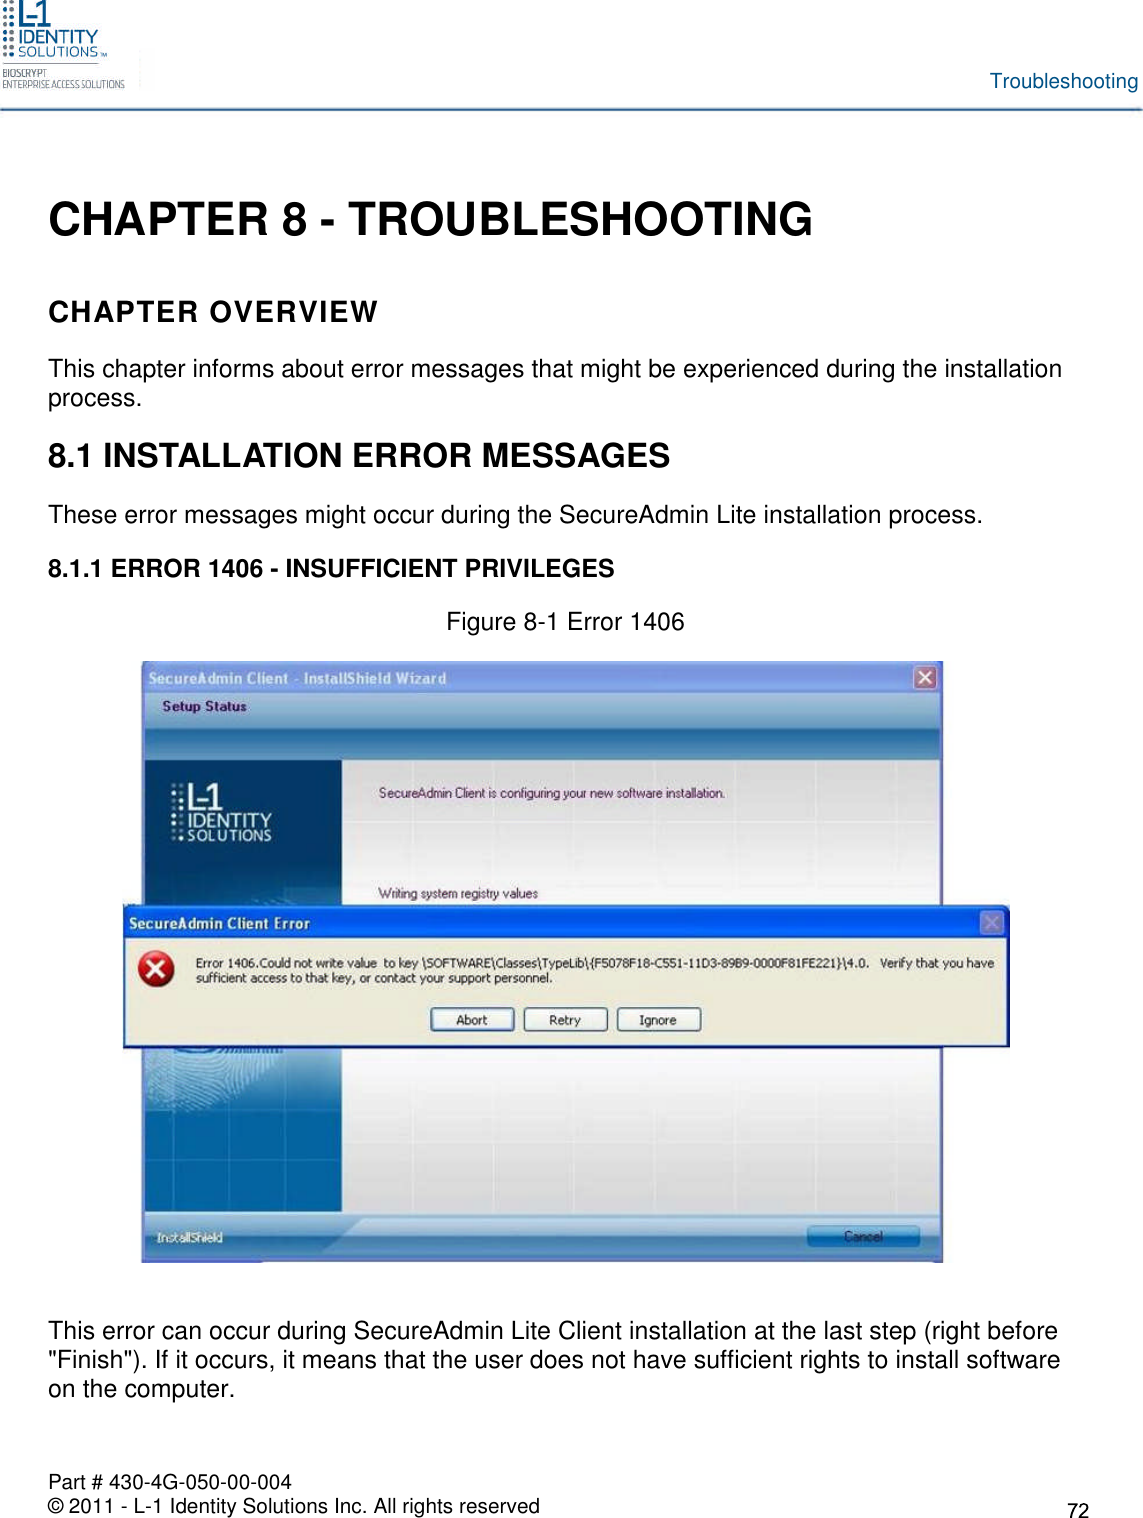 Part # 430-4G-050-00-004© 2011 - L-1 Identity Solutions Inc. All rights reservedTroubleshootingCHAPTER 8 - TROUBLESHOOTINGCHAPTER OVERVIEWThis chapter informs about error messages that might be experienced during the installationprocess.8.1 INSTALLATION ERROR MESSAGESThese error messages might occur during the SecureAdmin Lite installation process.8.1.1 ERROR 1406 - INSUFFICIENT PRIVILEGESFigure 8-1 Error 1406This error can occur during SecureAdmin Lite Client installation at the last step (right before&quot;Finish&quot;). If it occurs, it means that the user does not have sufficient rights to install softwareon the computer.